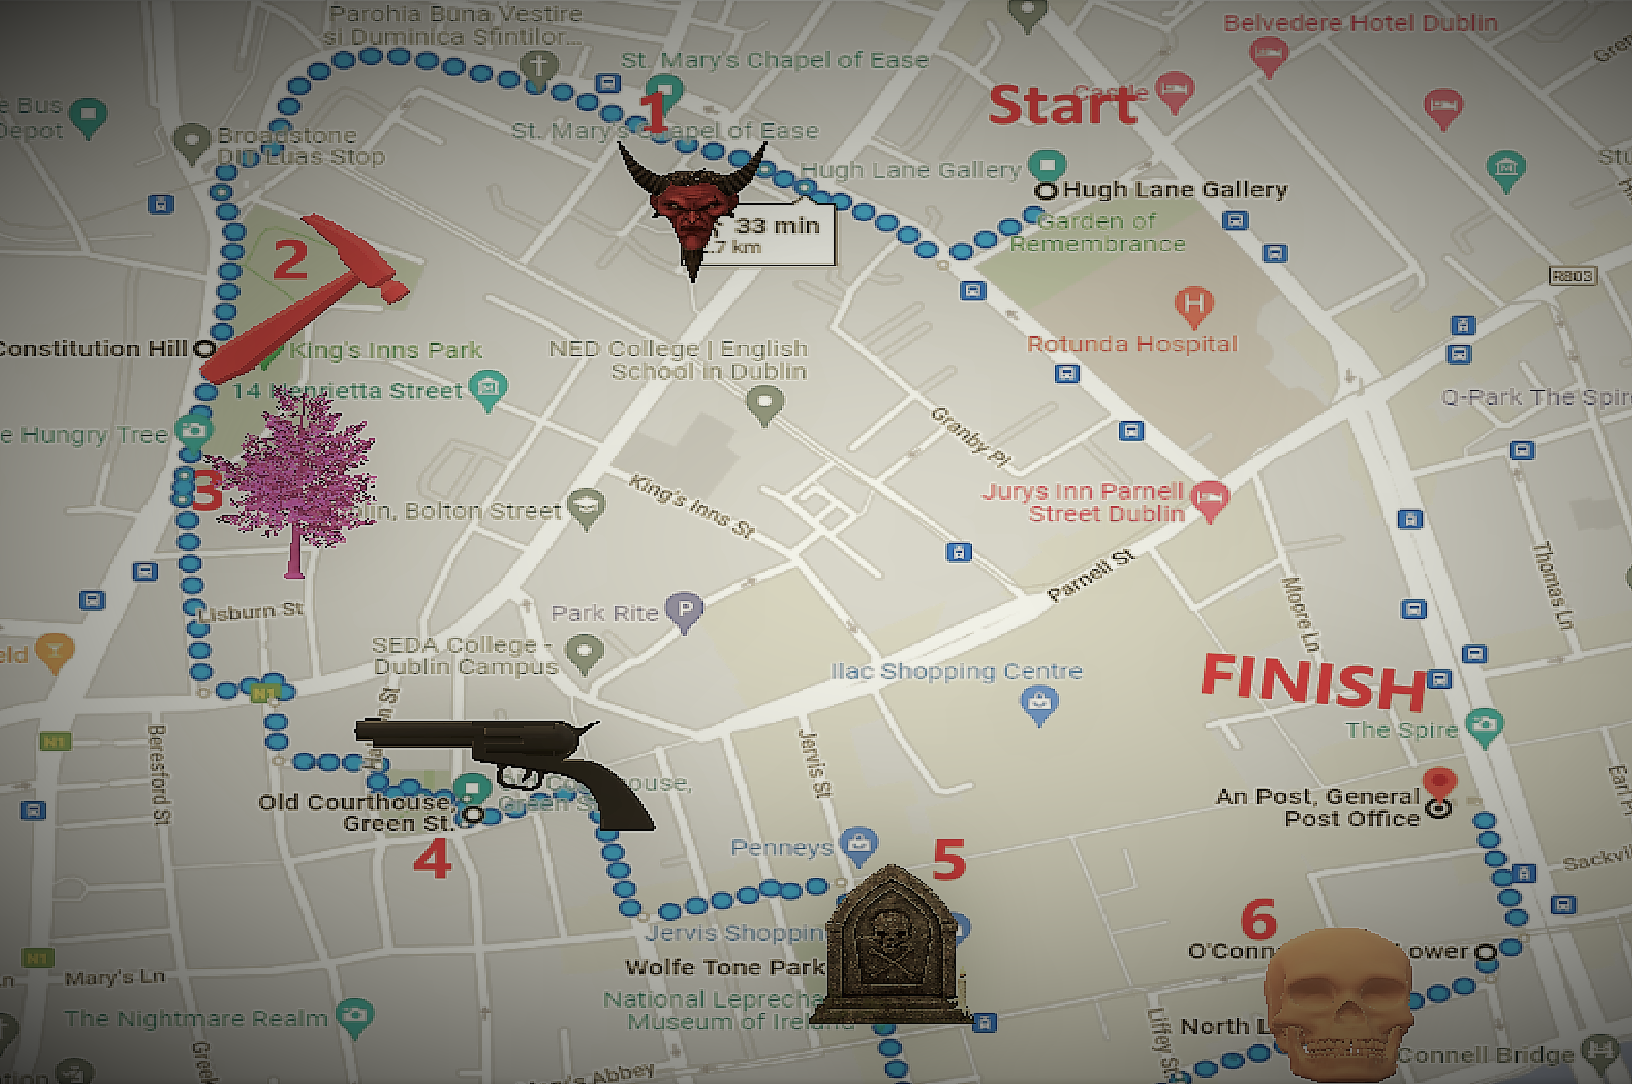 A detailed image of the Dublin Walking Horror Tour map.